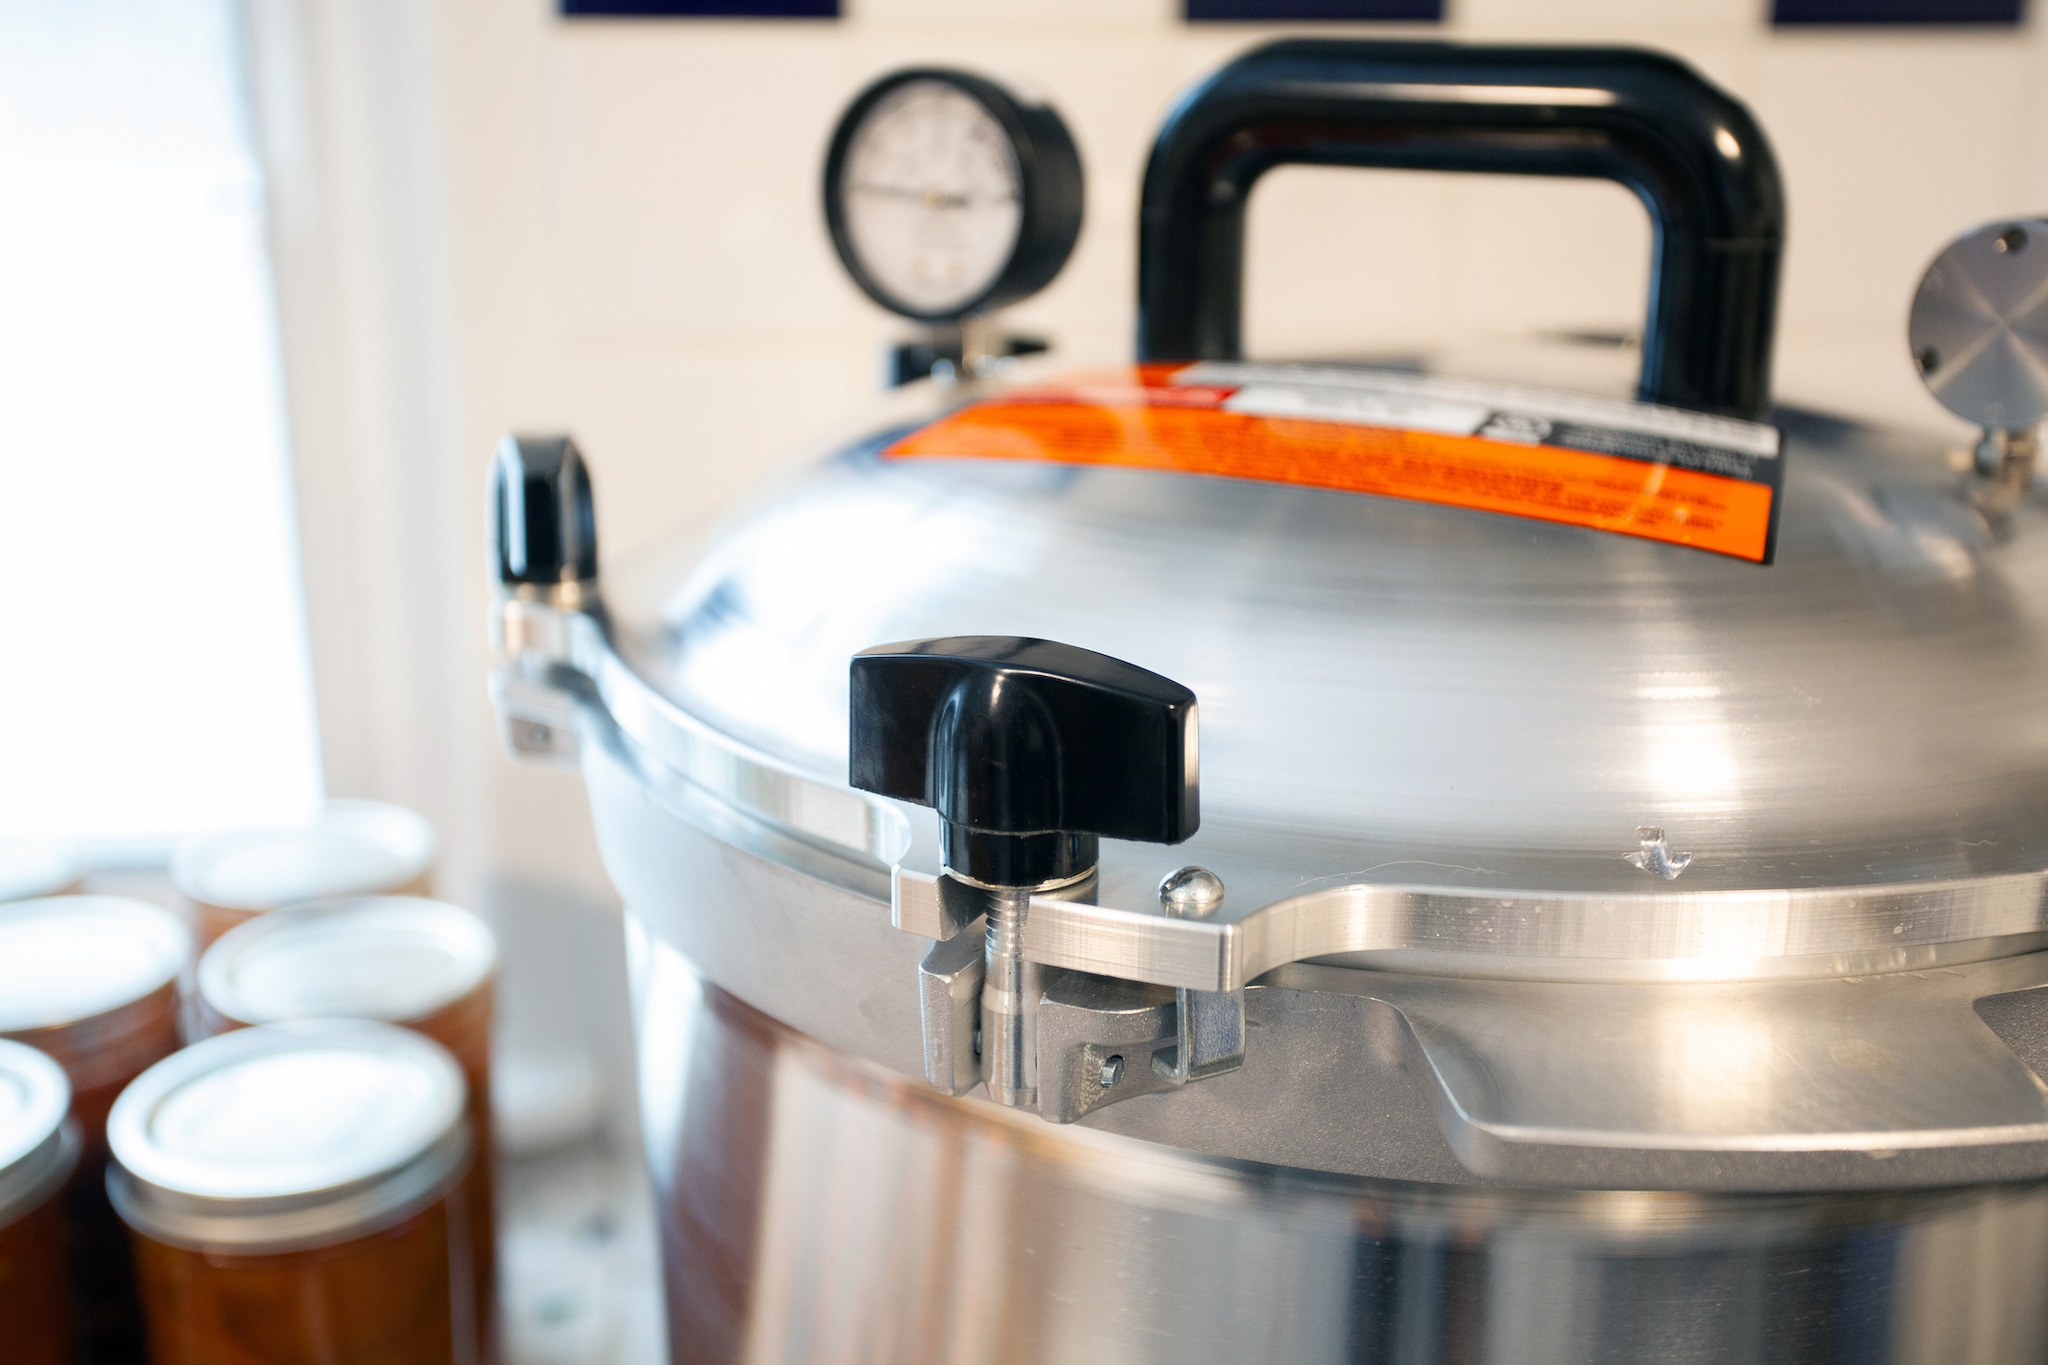 A proper canning pressure cooker next to several jars of homemade canned foods.